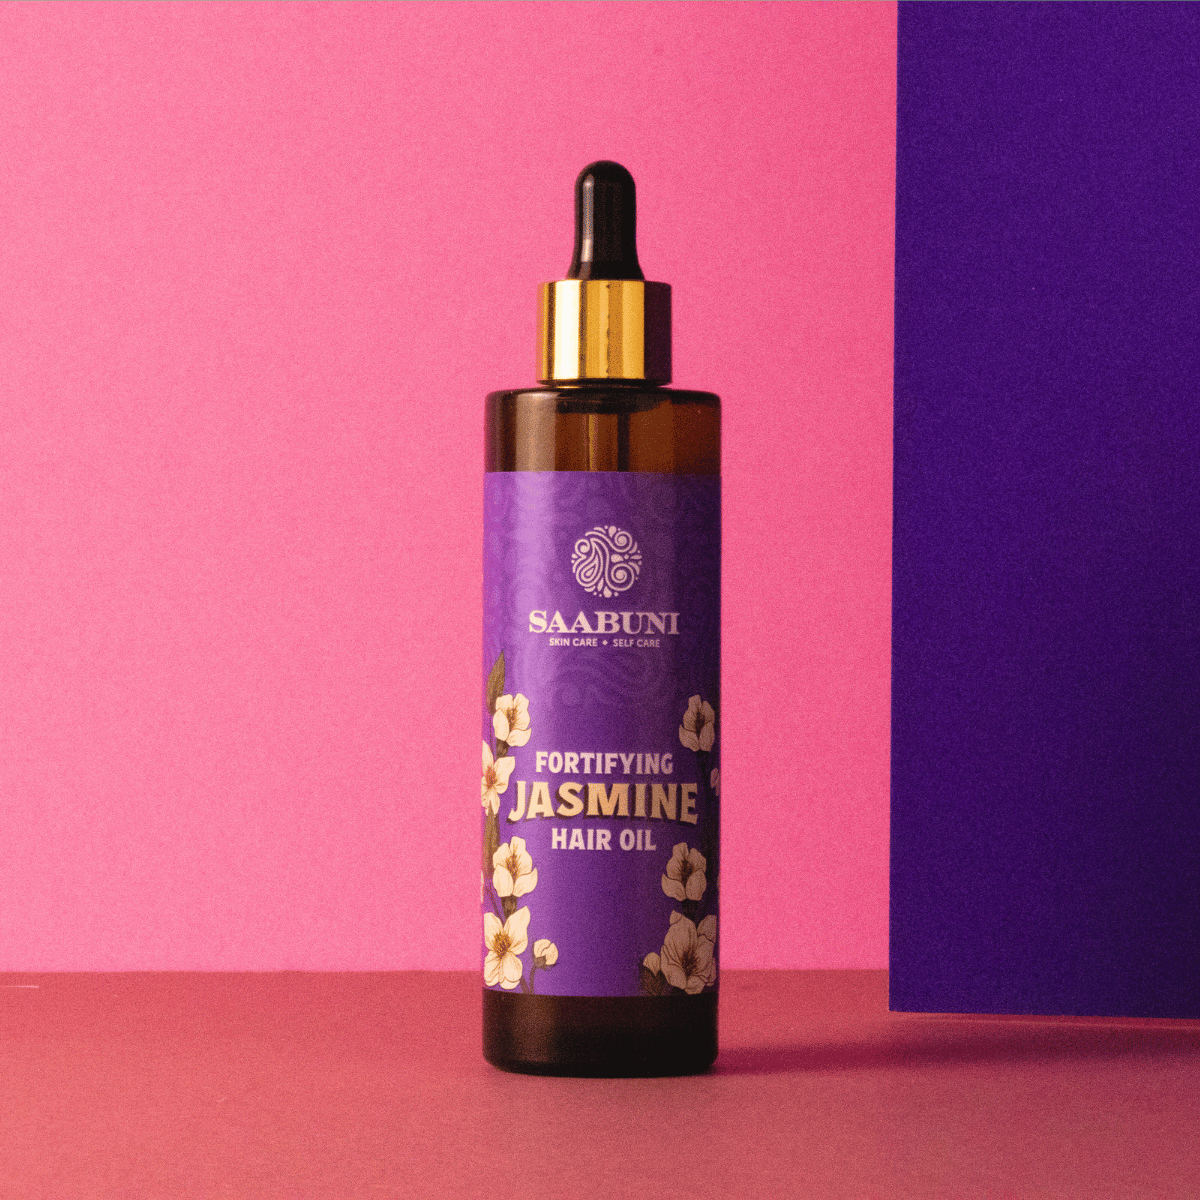 Fortifying Jasmine Hair Oil pink background